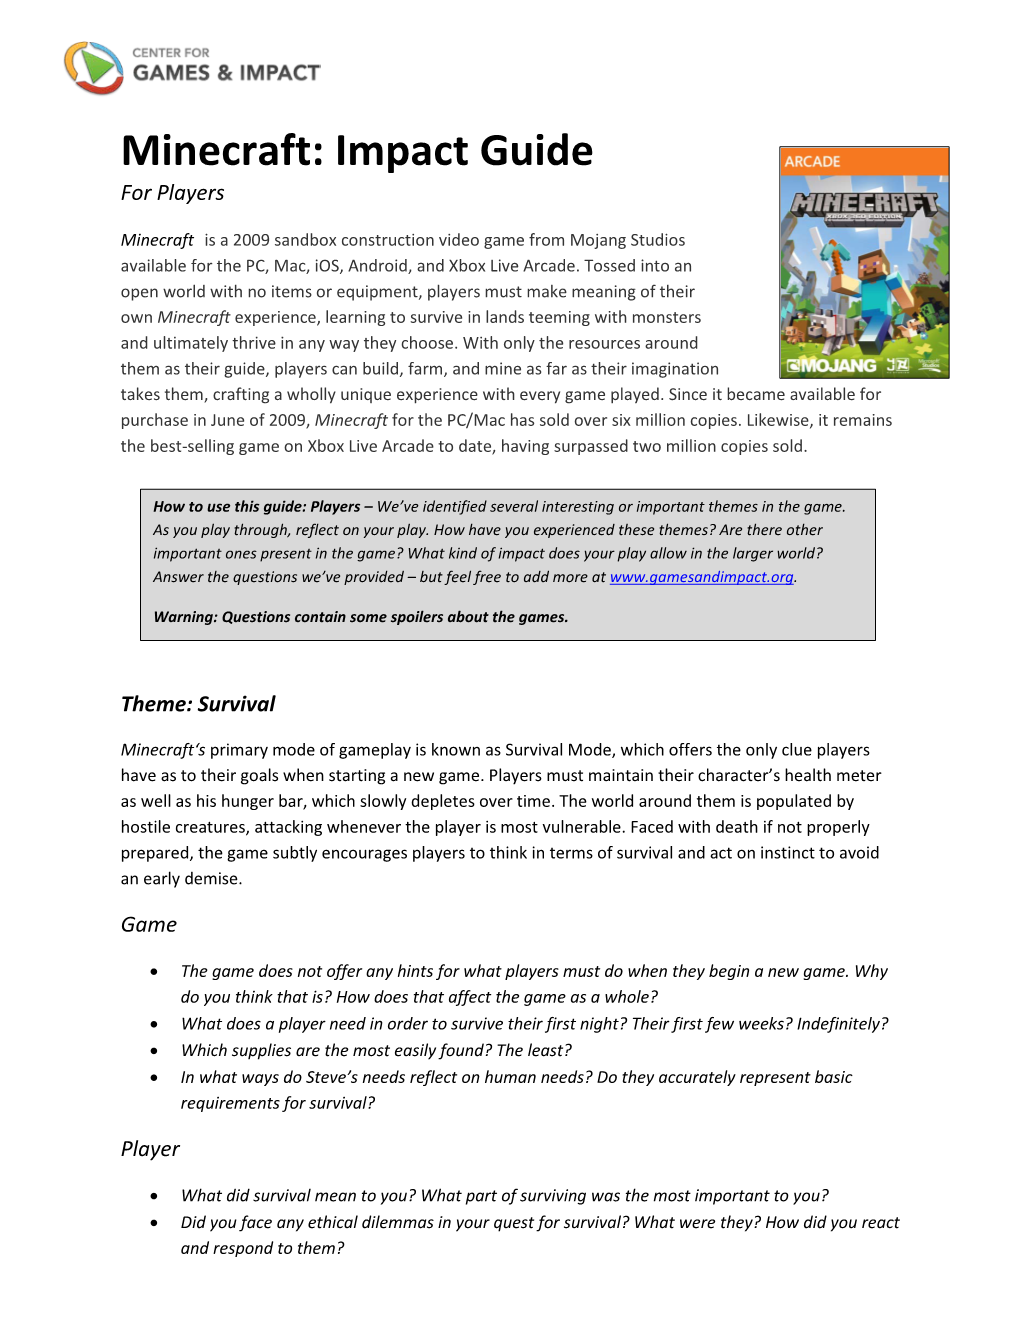 Minecraft: Impact Guide for Players